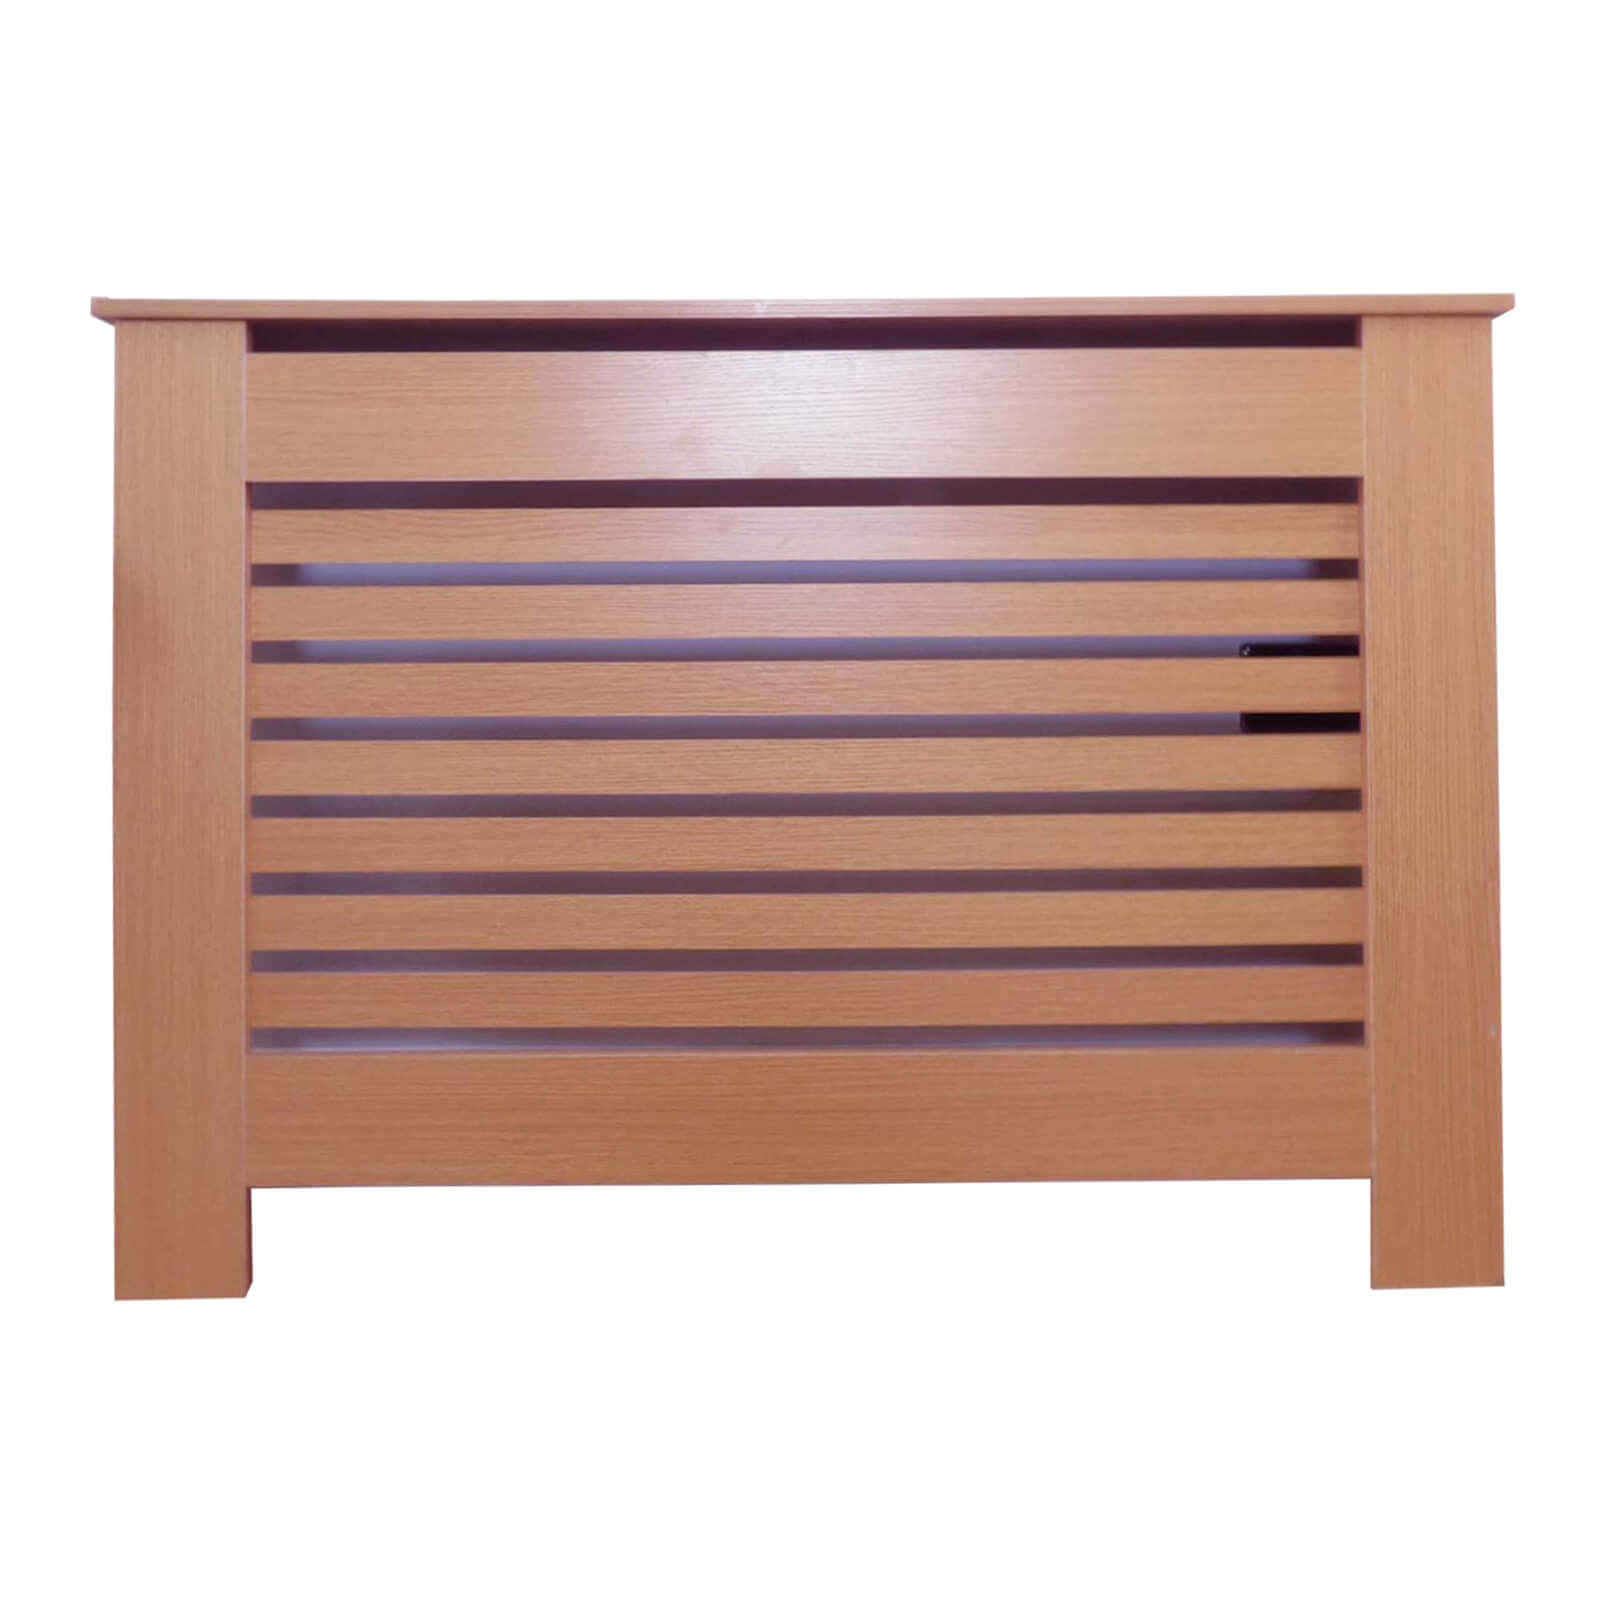 Radiator Cover with Horizontal Slatted Design in Oak - Small